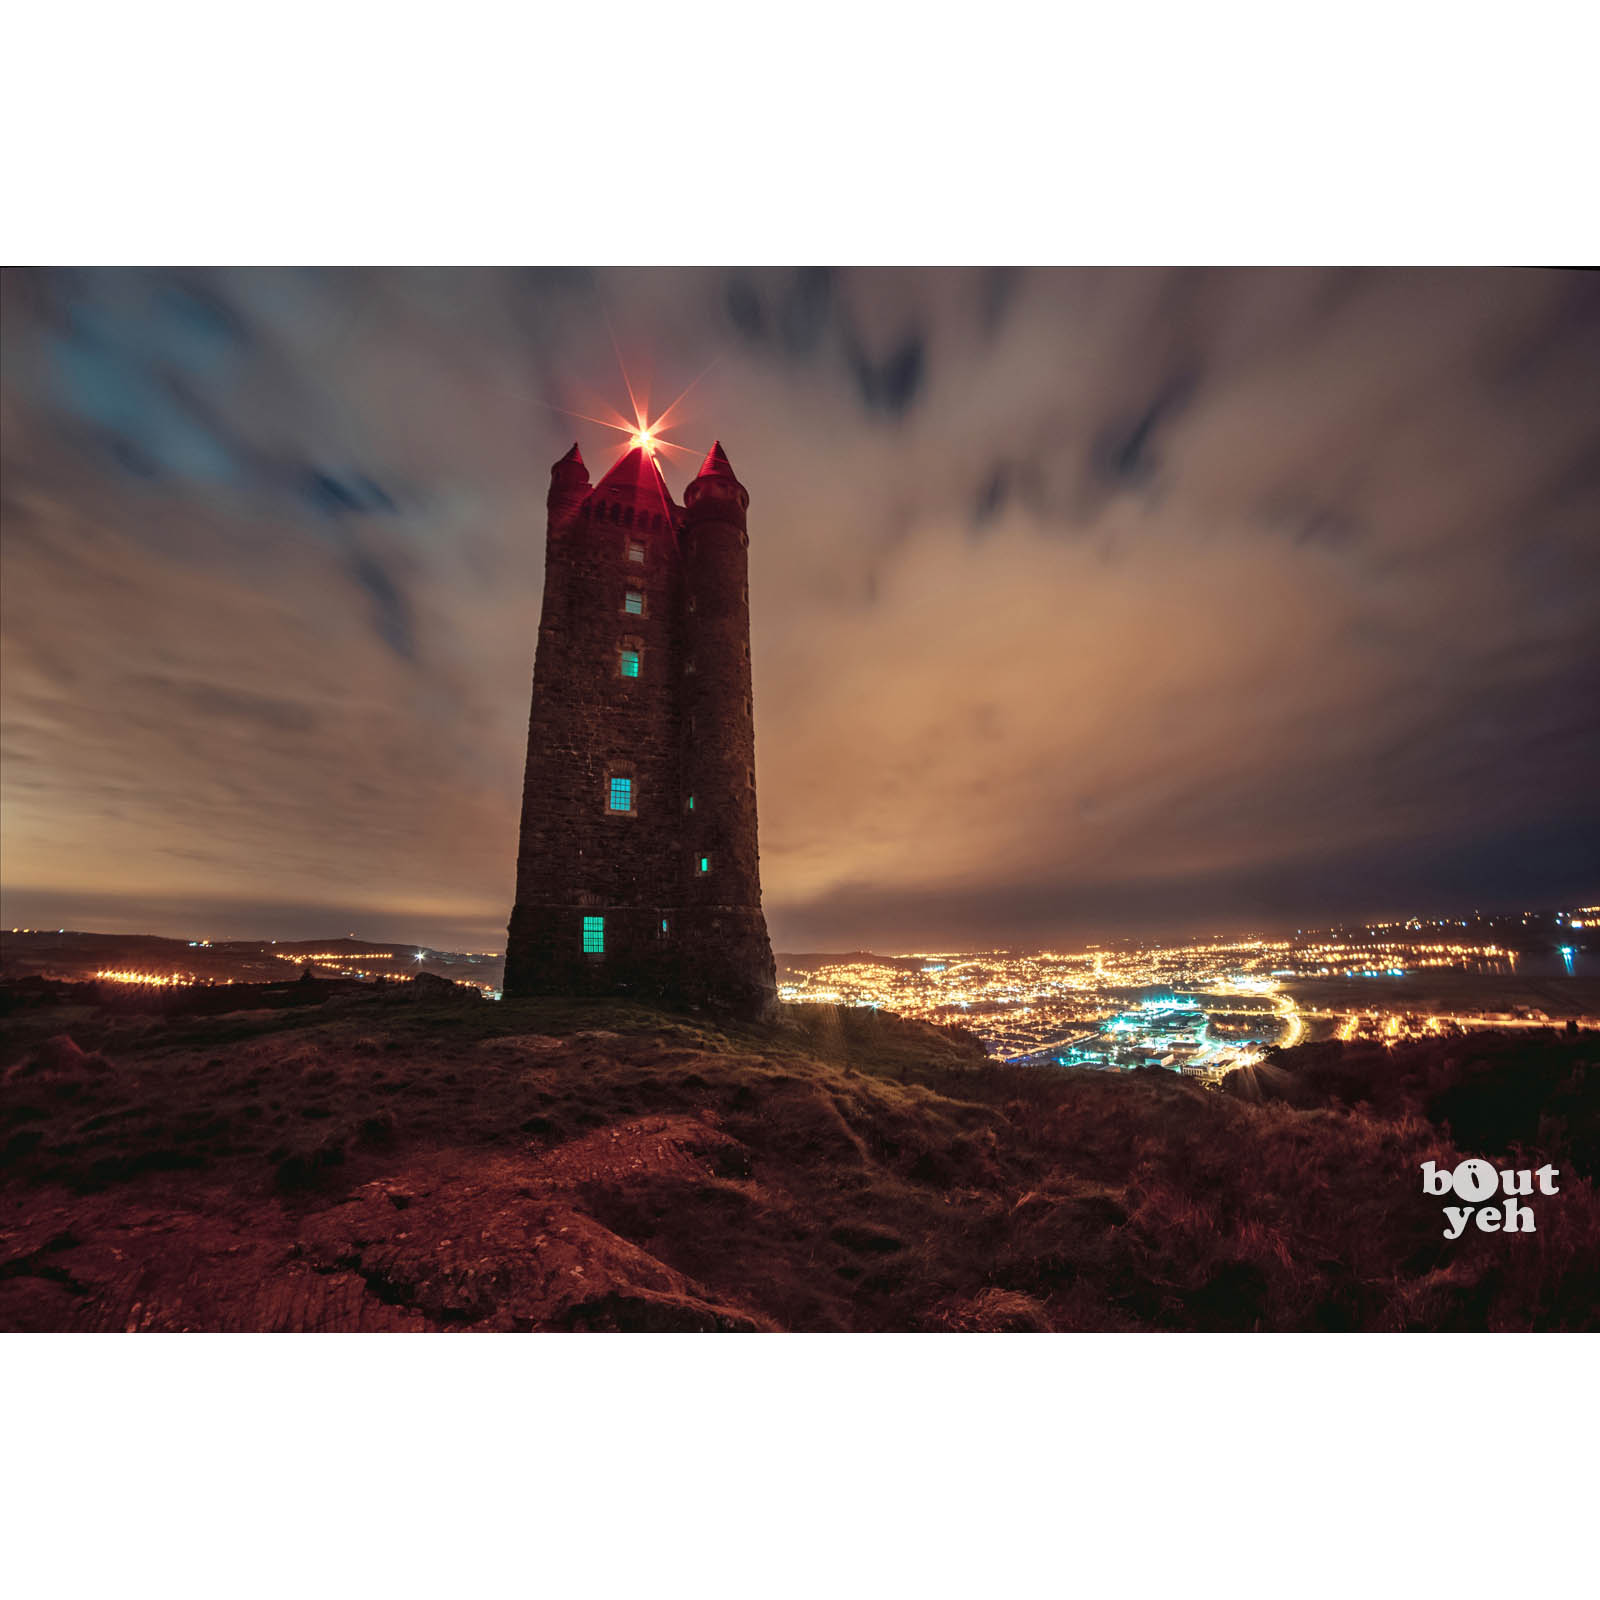 Image - Scrabo Tower Northern Ireland by rskb - photographic print for sale.